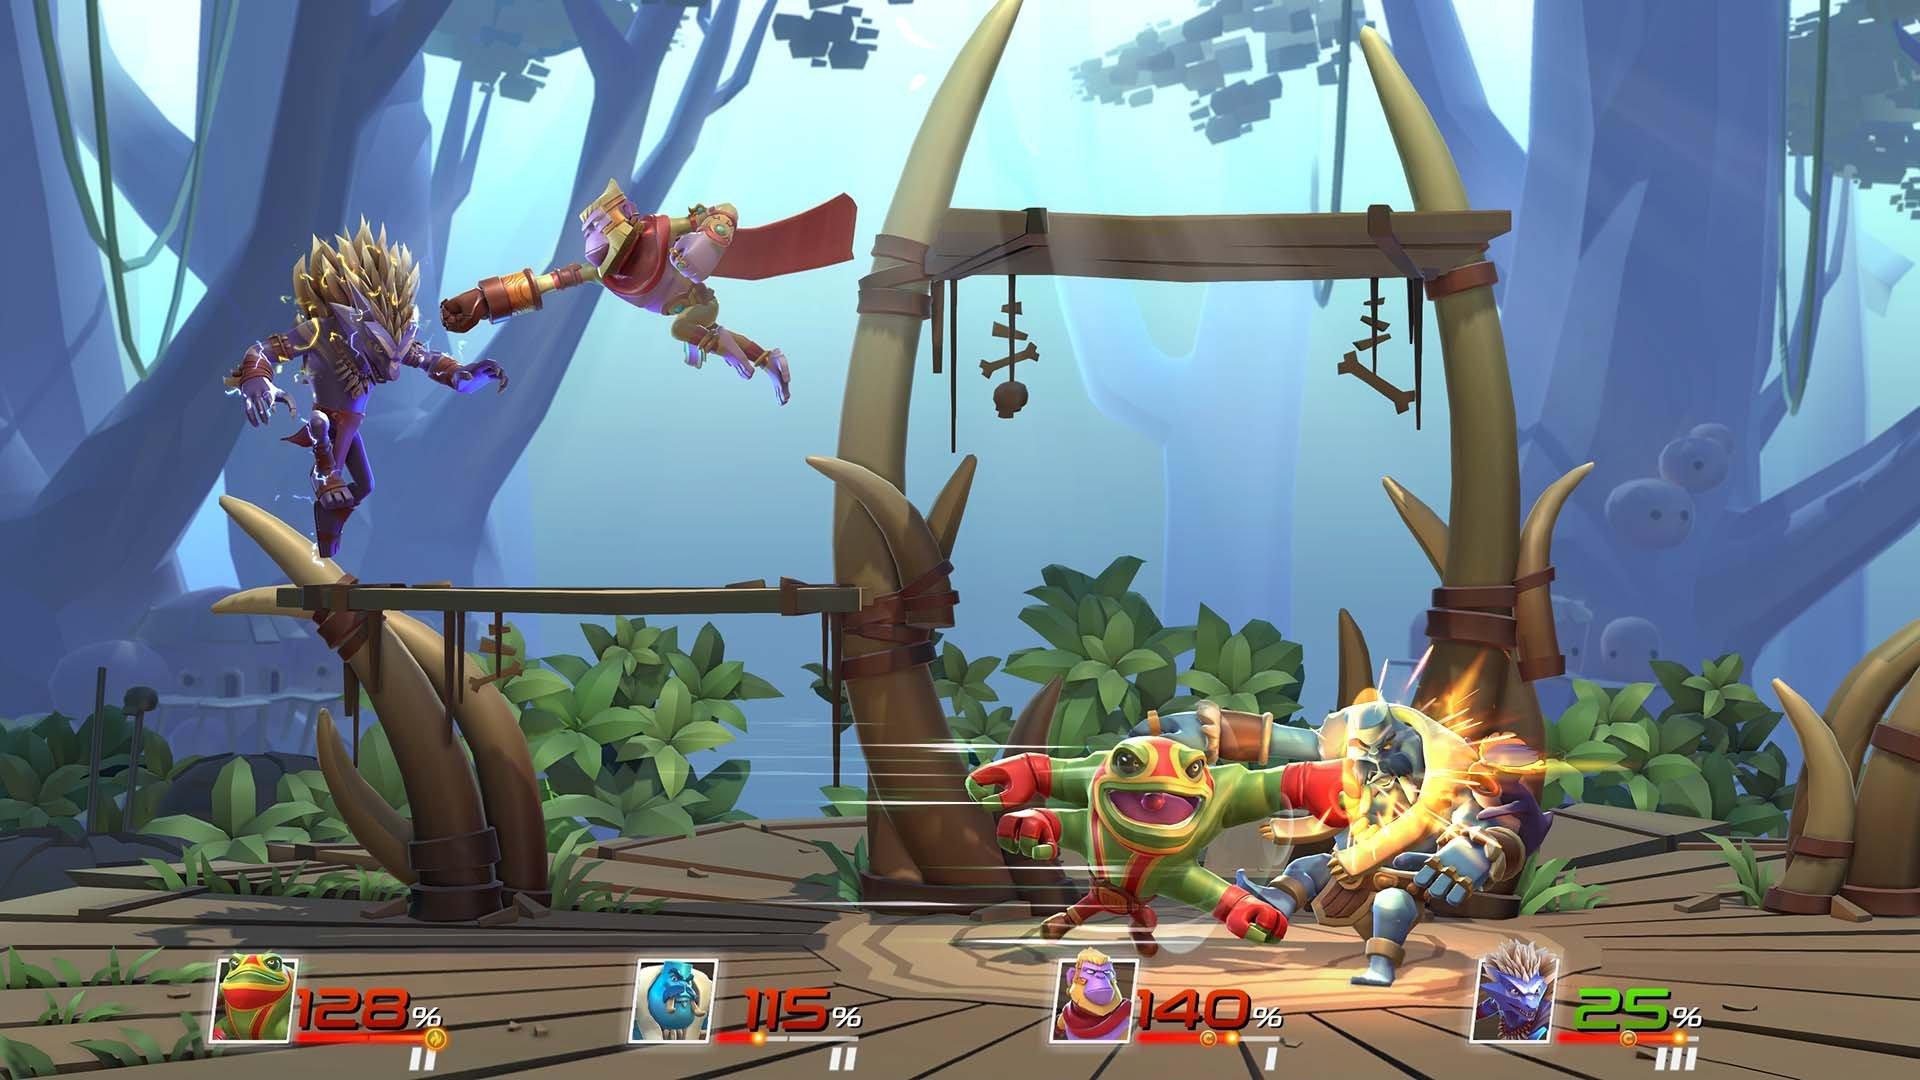 Super Smash Bros.-like 'Brawlout' launches on Xbox One